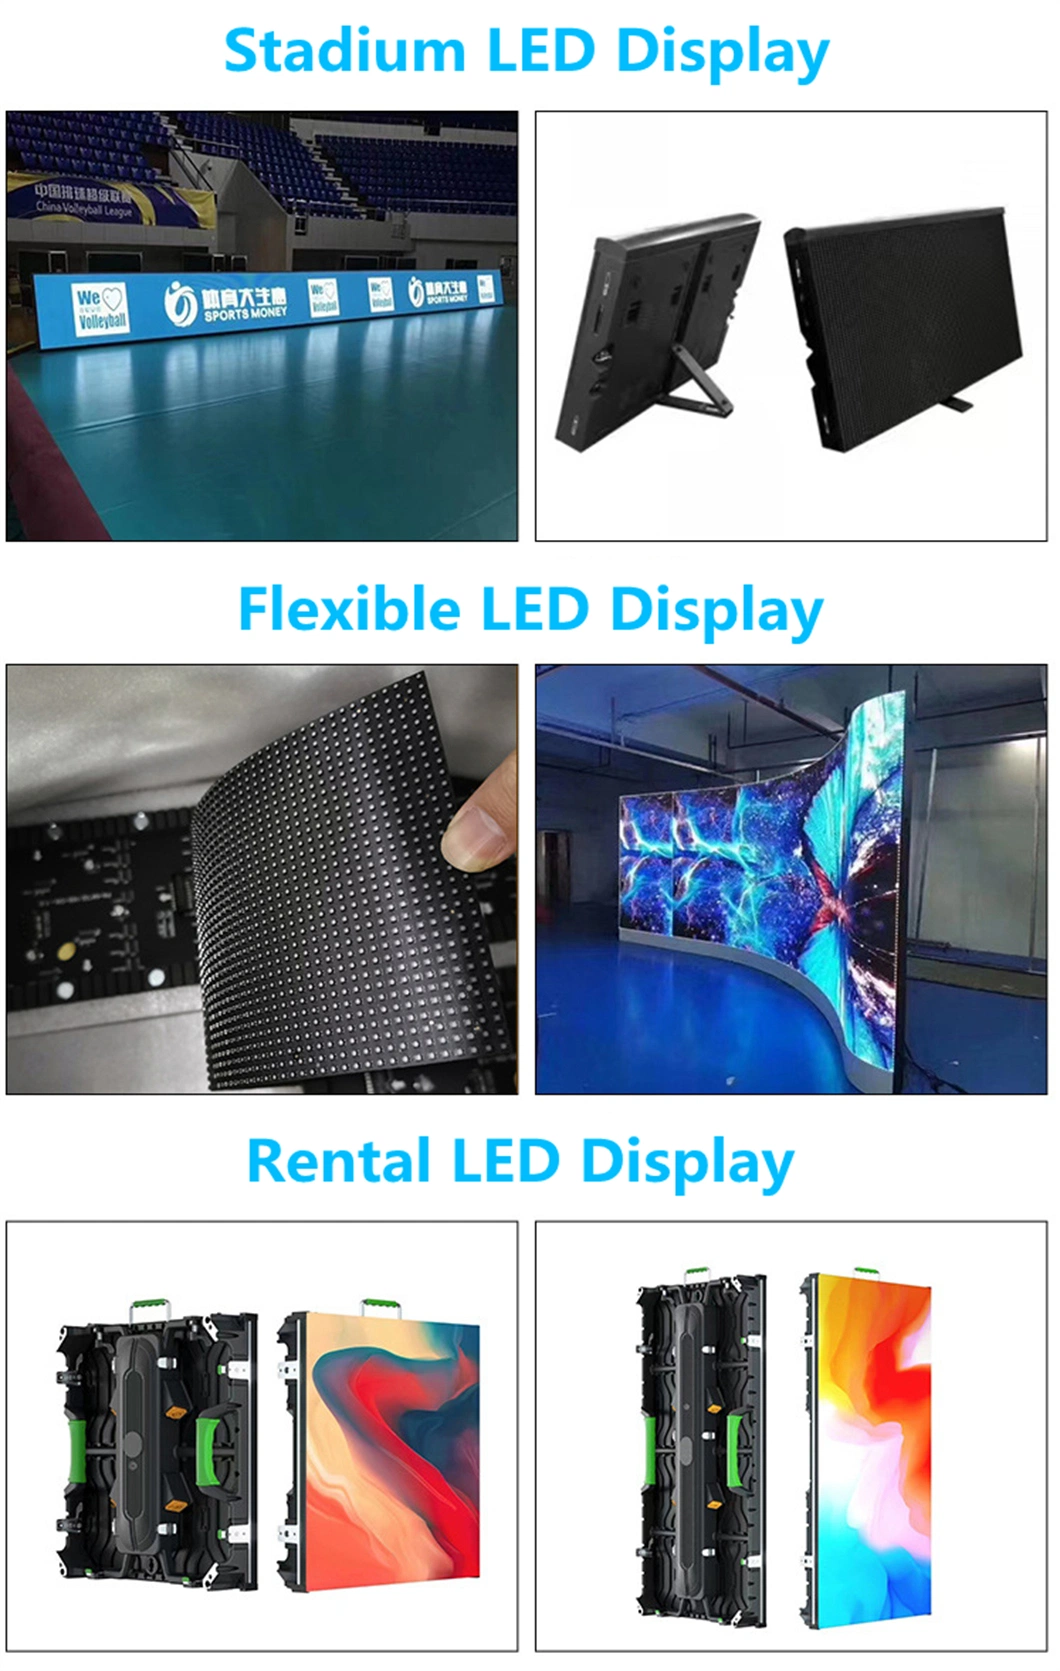 Outdoor Display LED Point Light Msd Backlight 6011 Fine Pitch Panel White WiFi Camera IP3 Indoor LED Pixel RGB Module